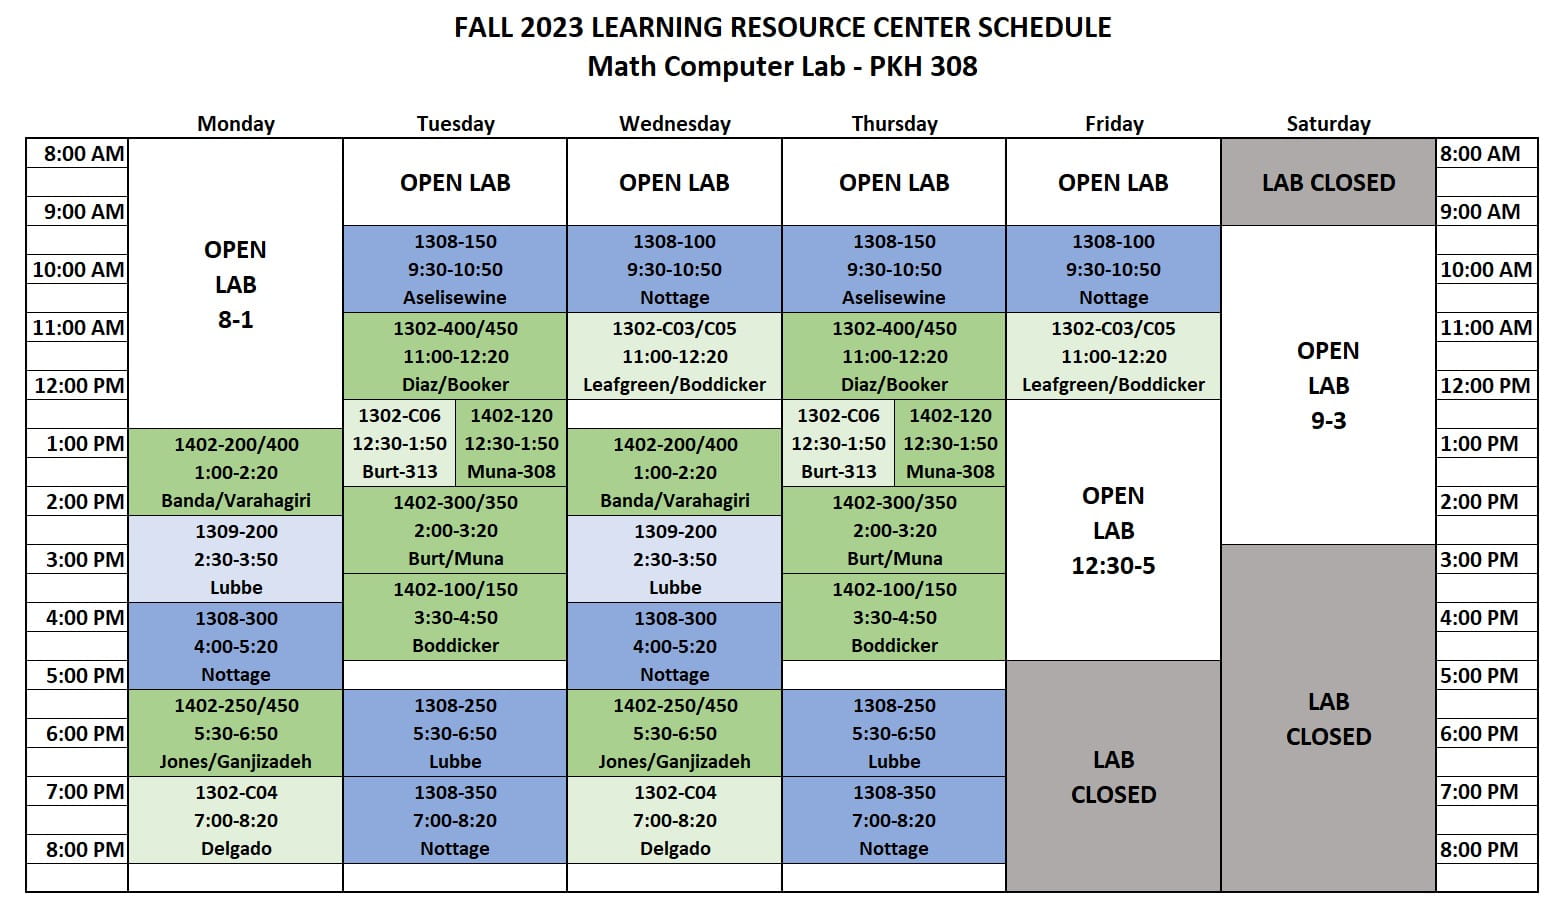 Table showing the schedule of class times and open lab times. Open lab times are Mondays from 8 a m to 1 p m, Tuesday through Friday from 8 a m to 9 30 a m, Friday from 12 30 p m to 5 p m, and Saturday from 9 a m to 1 p m.